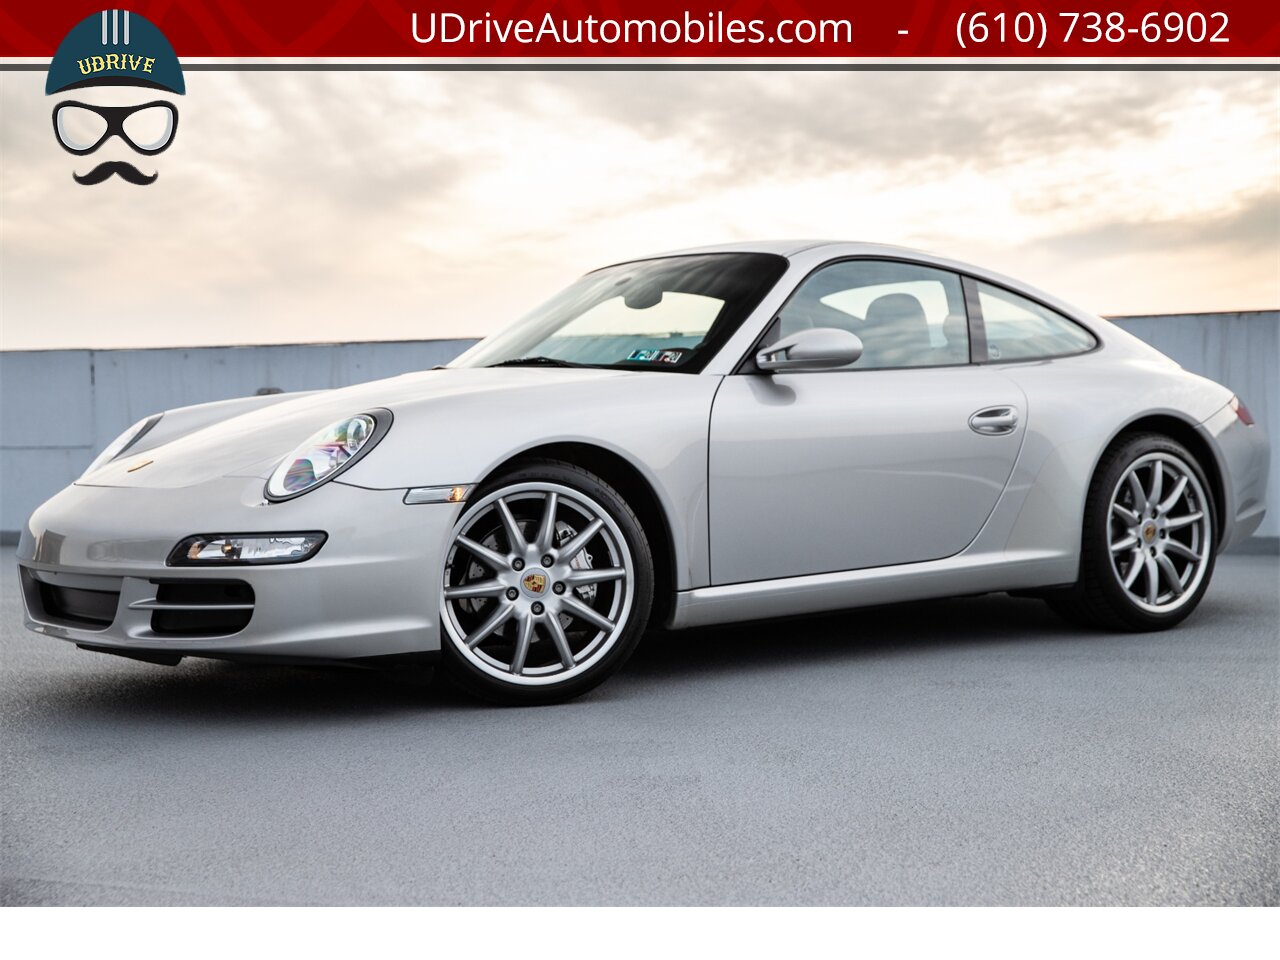 2006 Porsche 911 997 Carrera Coupe 6 Speed 19in Whls Immaculate   - Photo 1 - West Chester, PA 19382